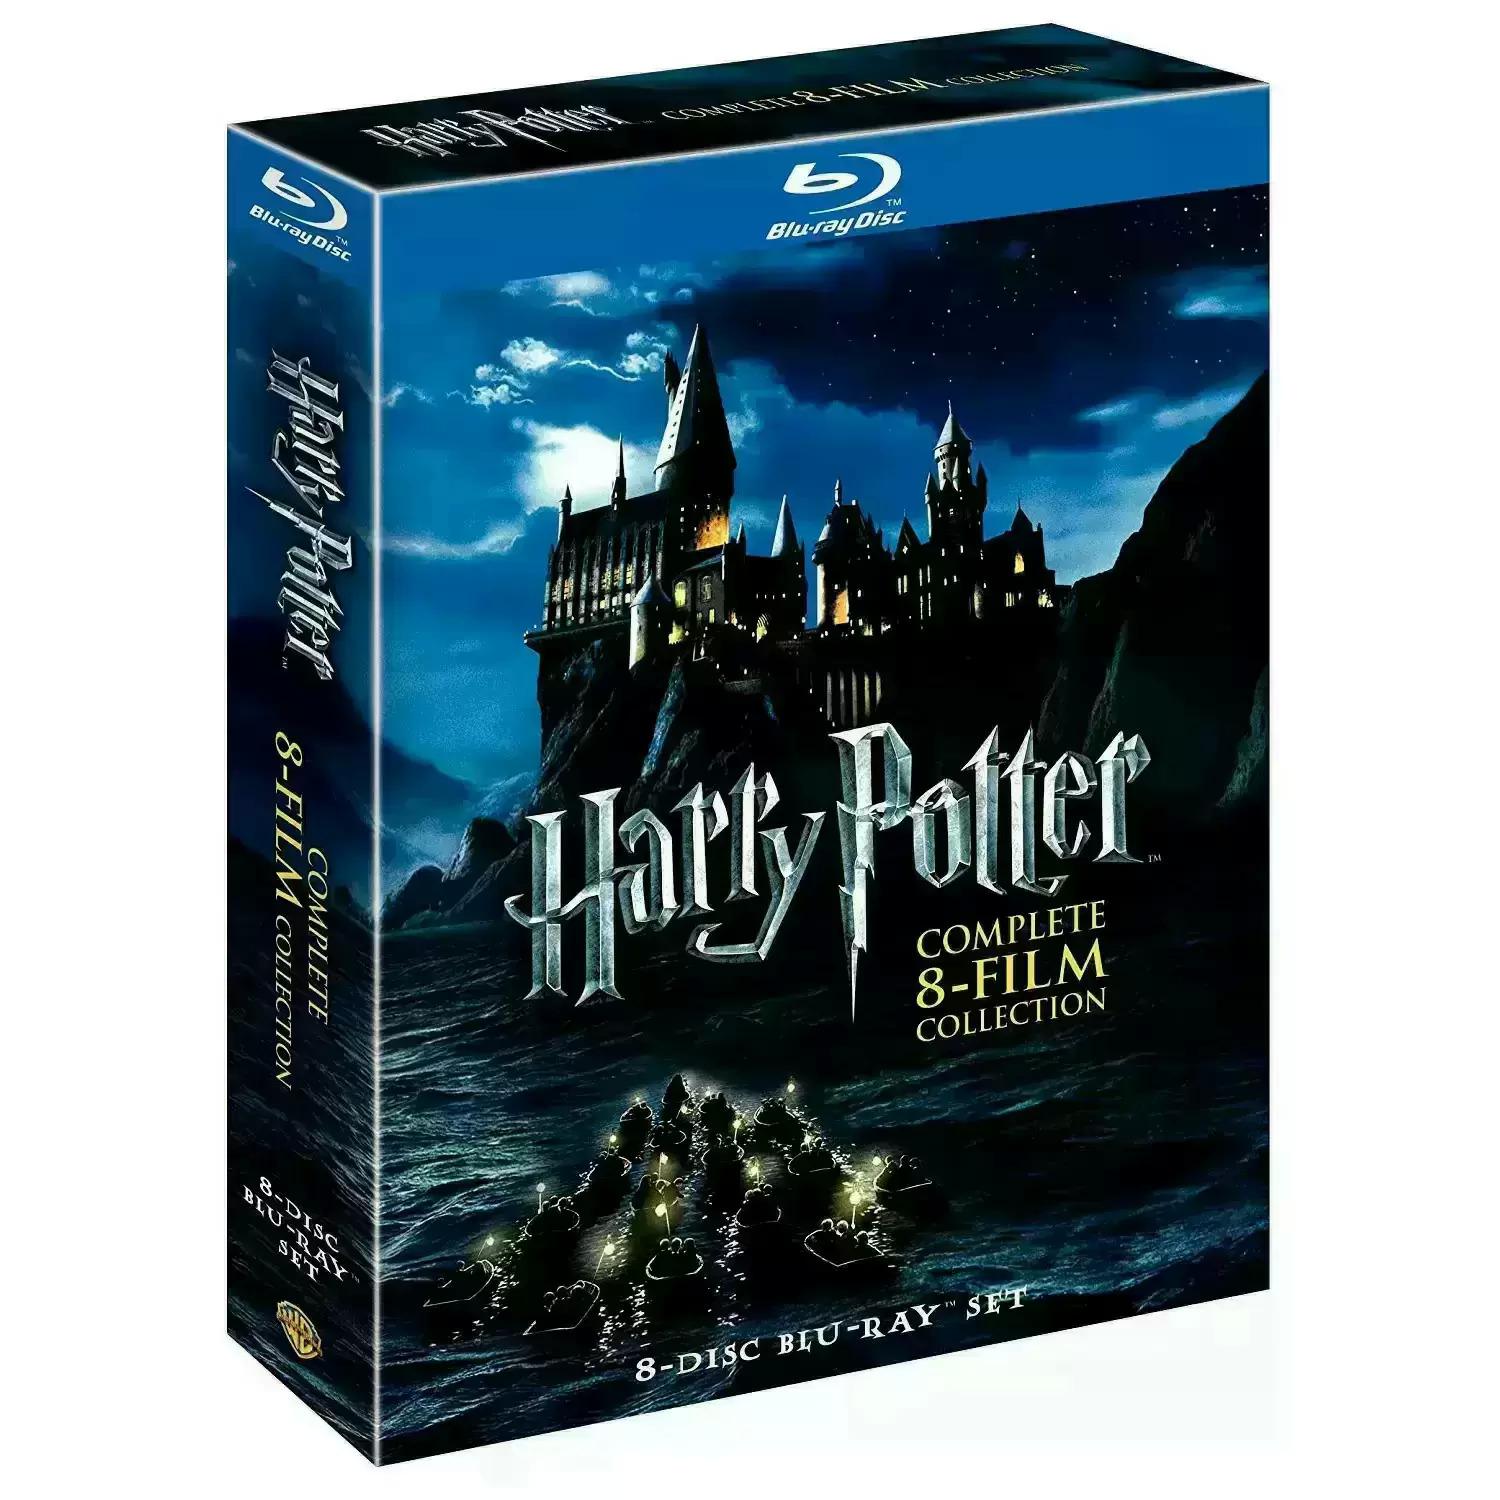 Harry Potter Complete 8-Film Collection Blu-ray for $27.99 Shipped